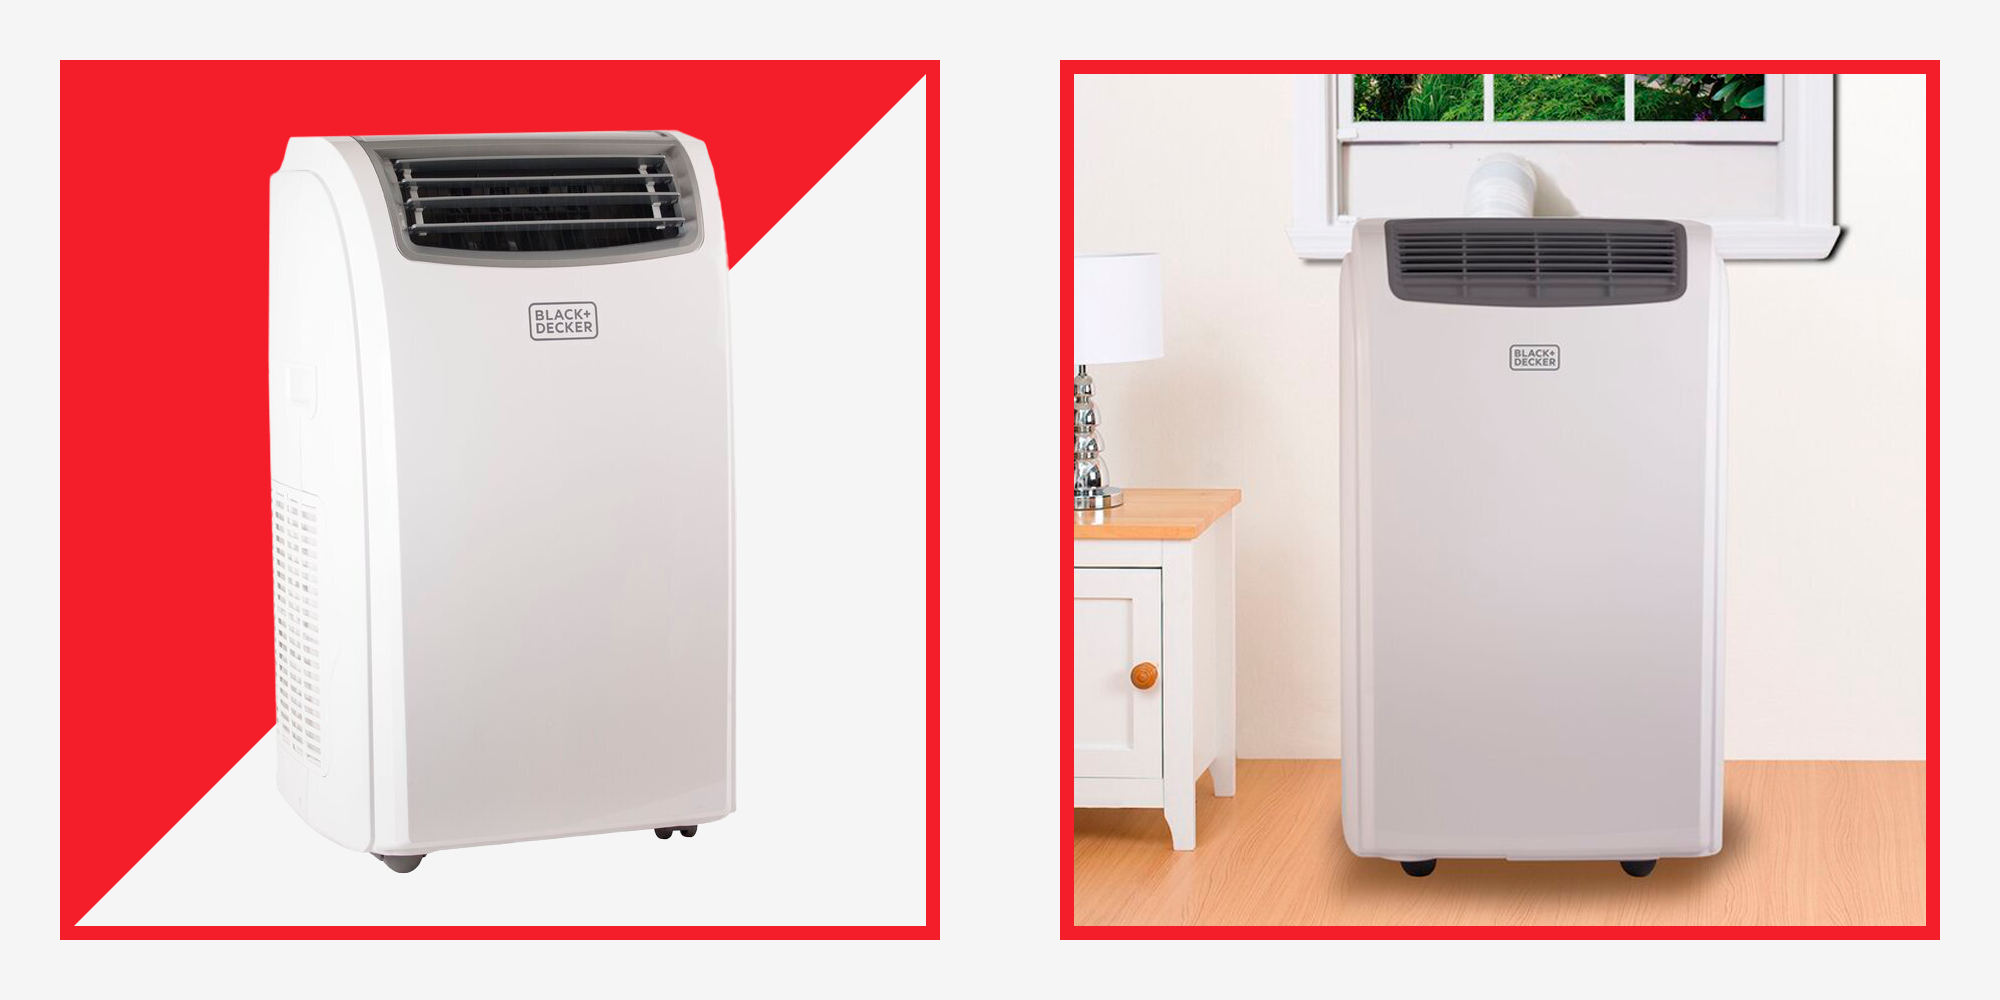 Wayfair's Memorial Day Sale Has Great Deals on Air Conditioners